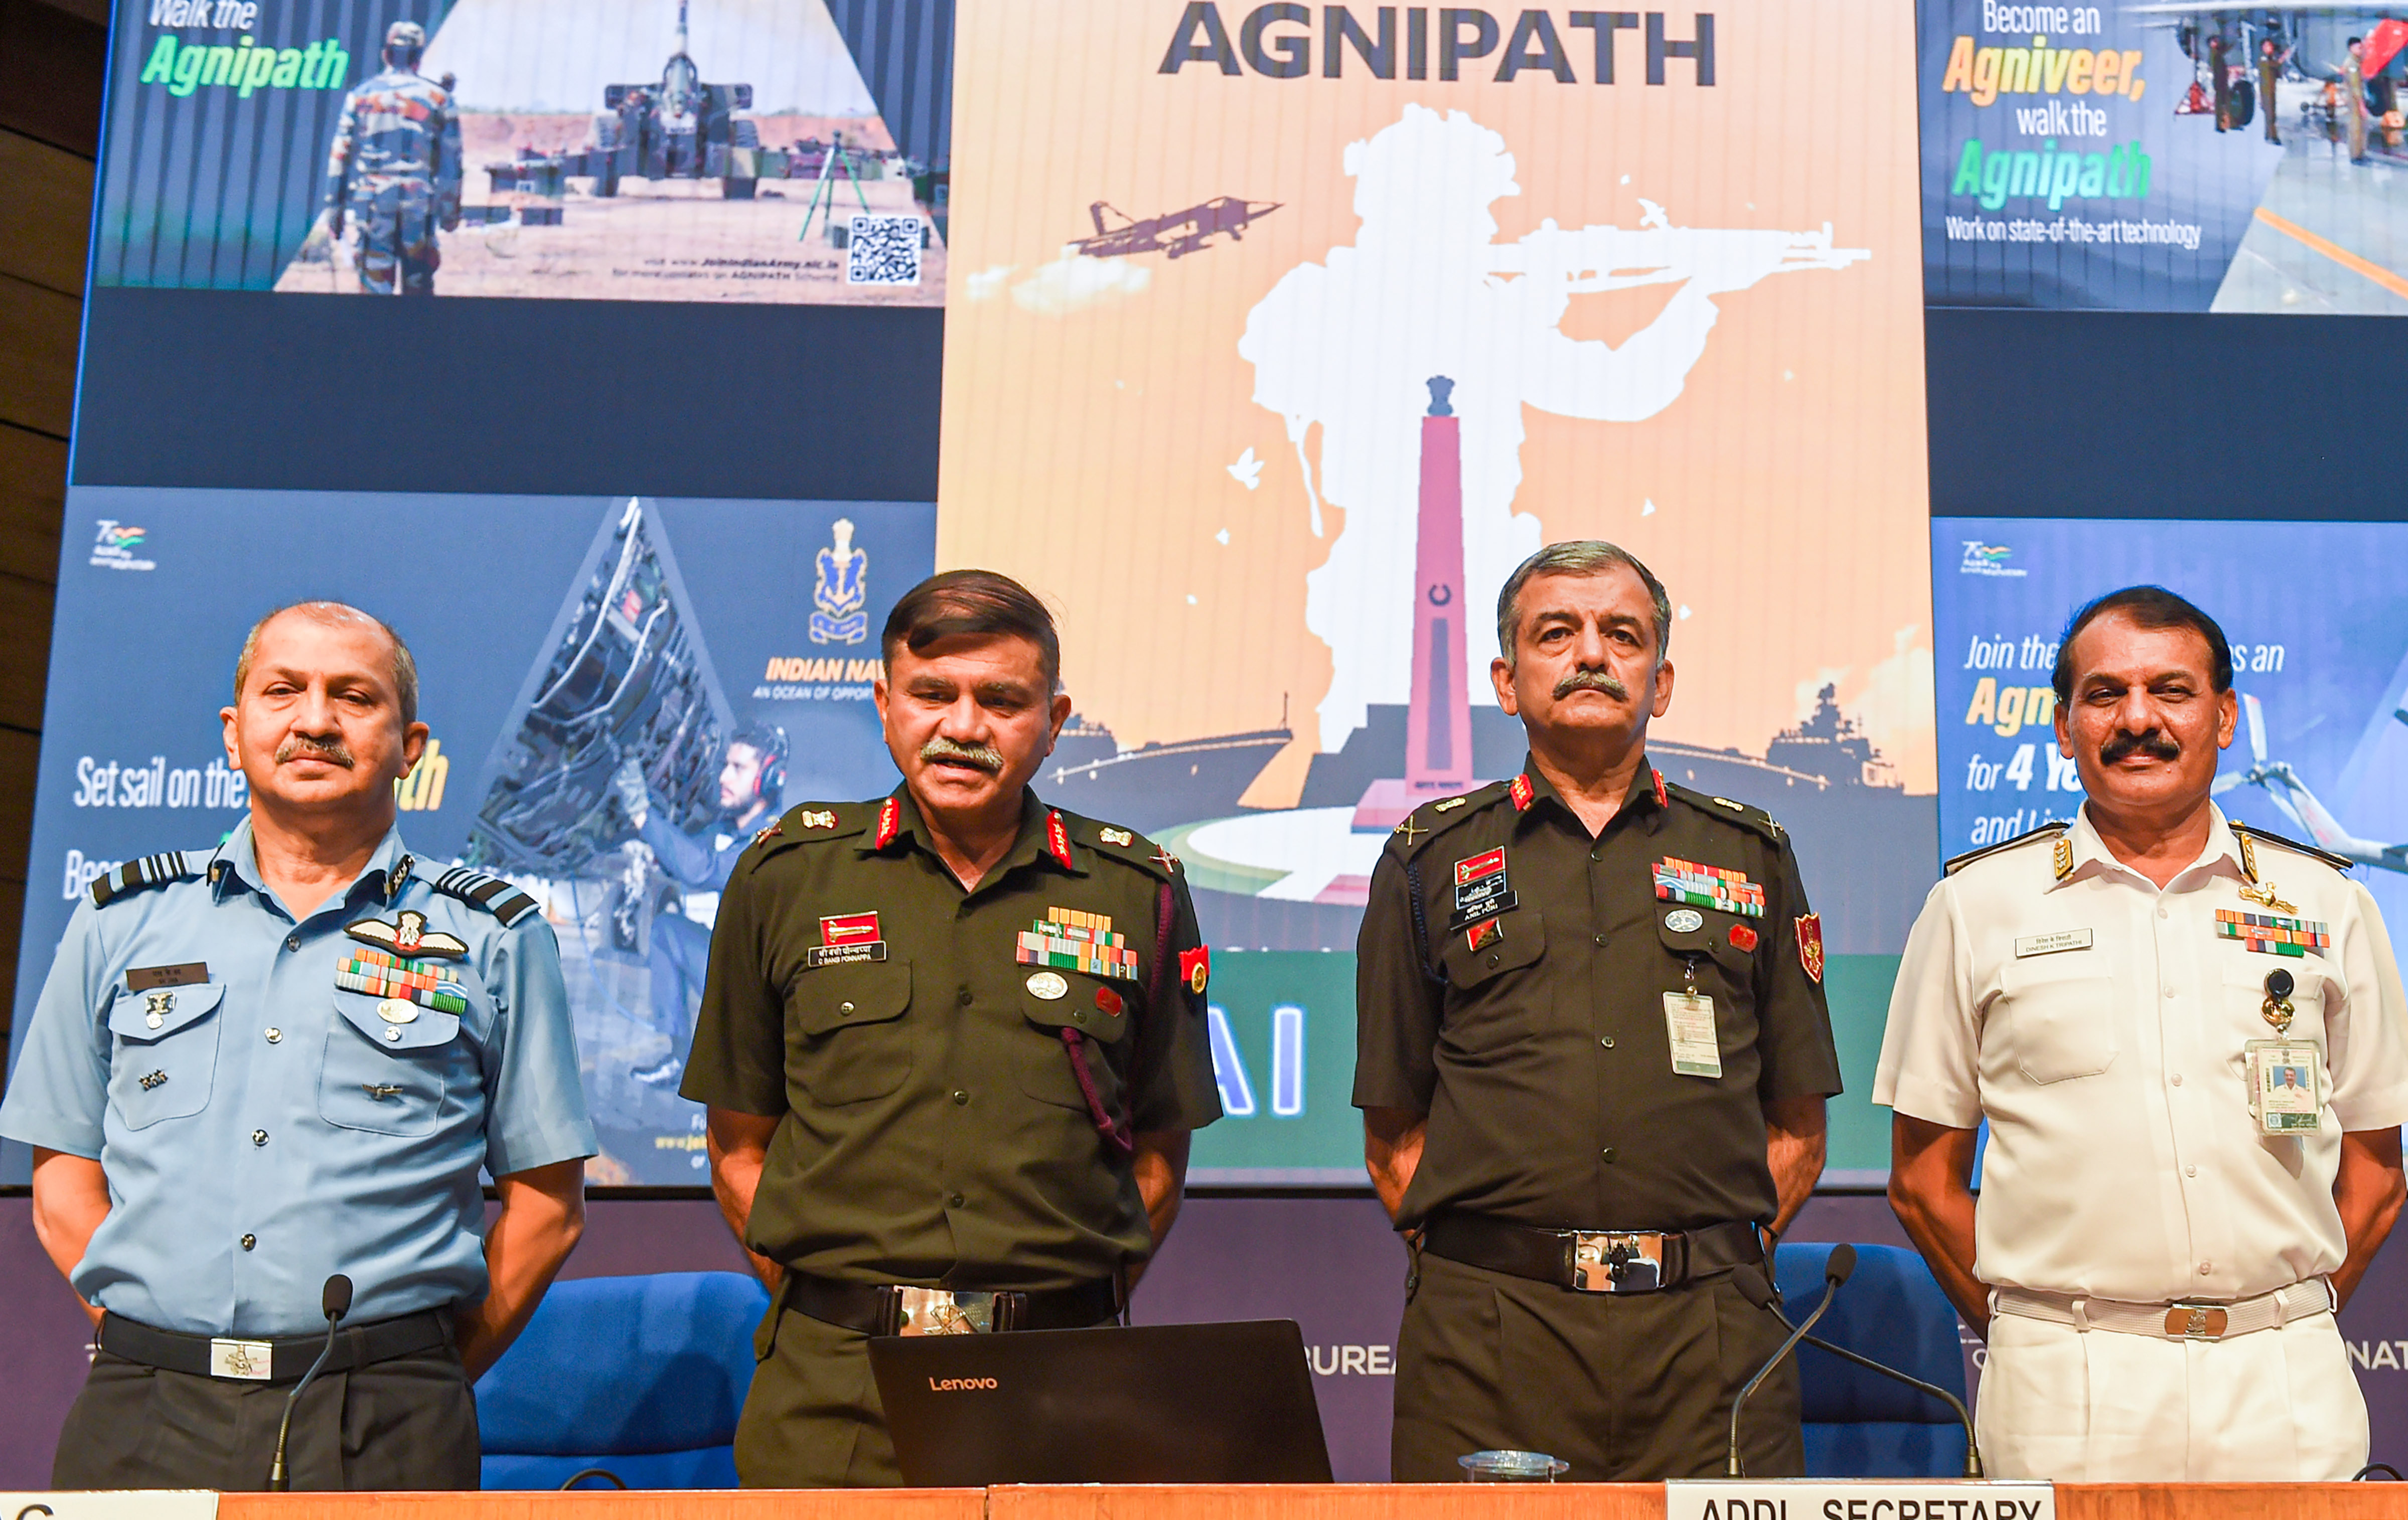 Agnipath scheme: Indian Air Force receives 2.72 lakh applications in 7 days